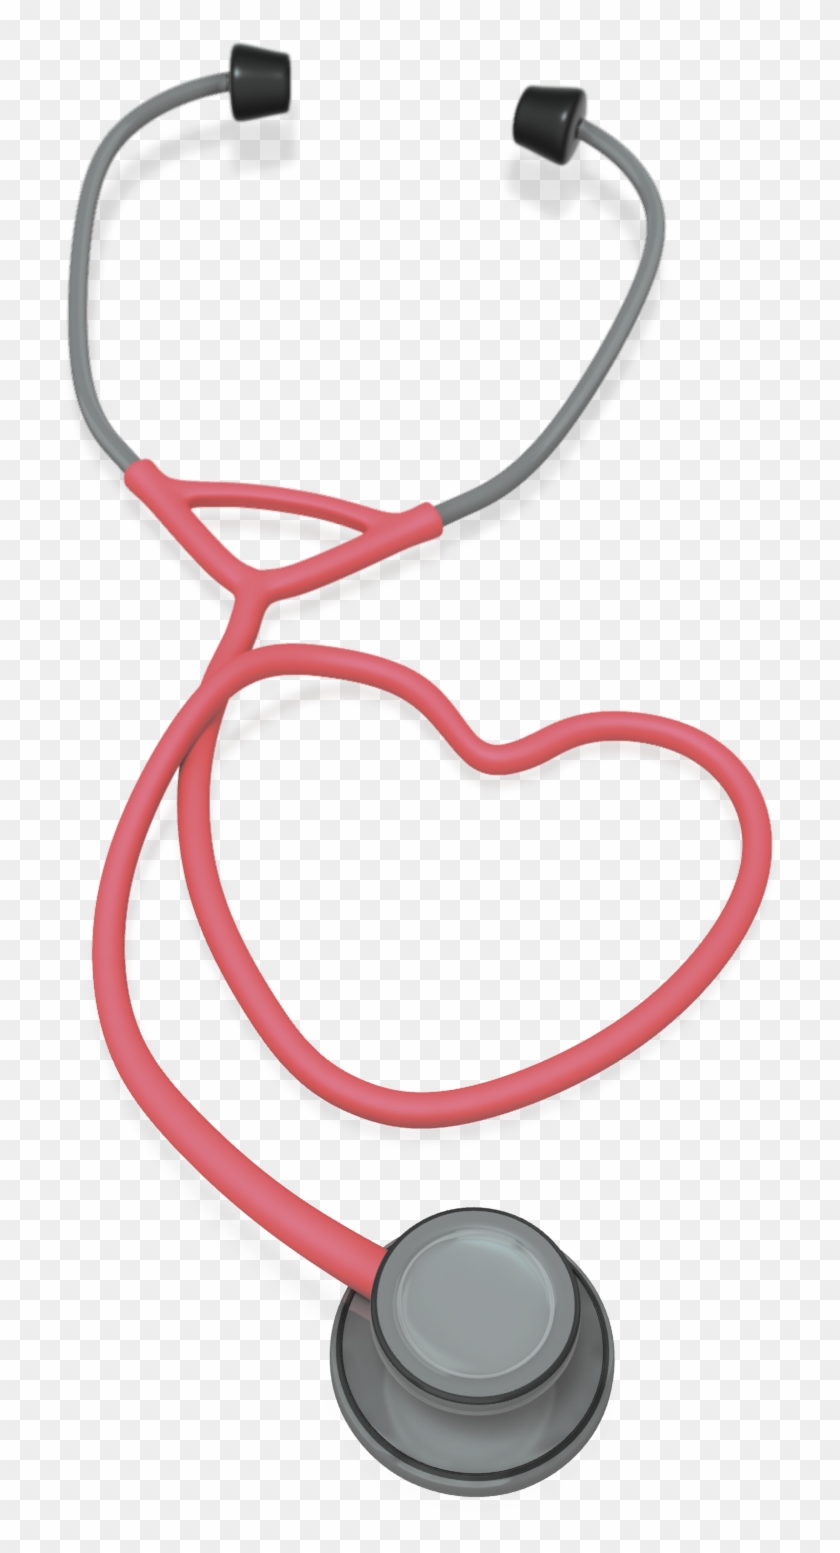 Free Pictures Heart Stethoscope Clipart Image - Stethoscope Clipart #332998